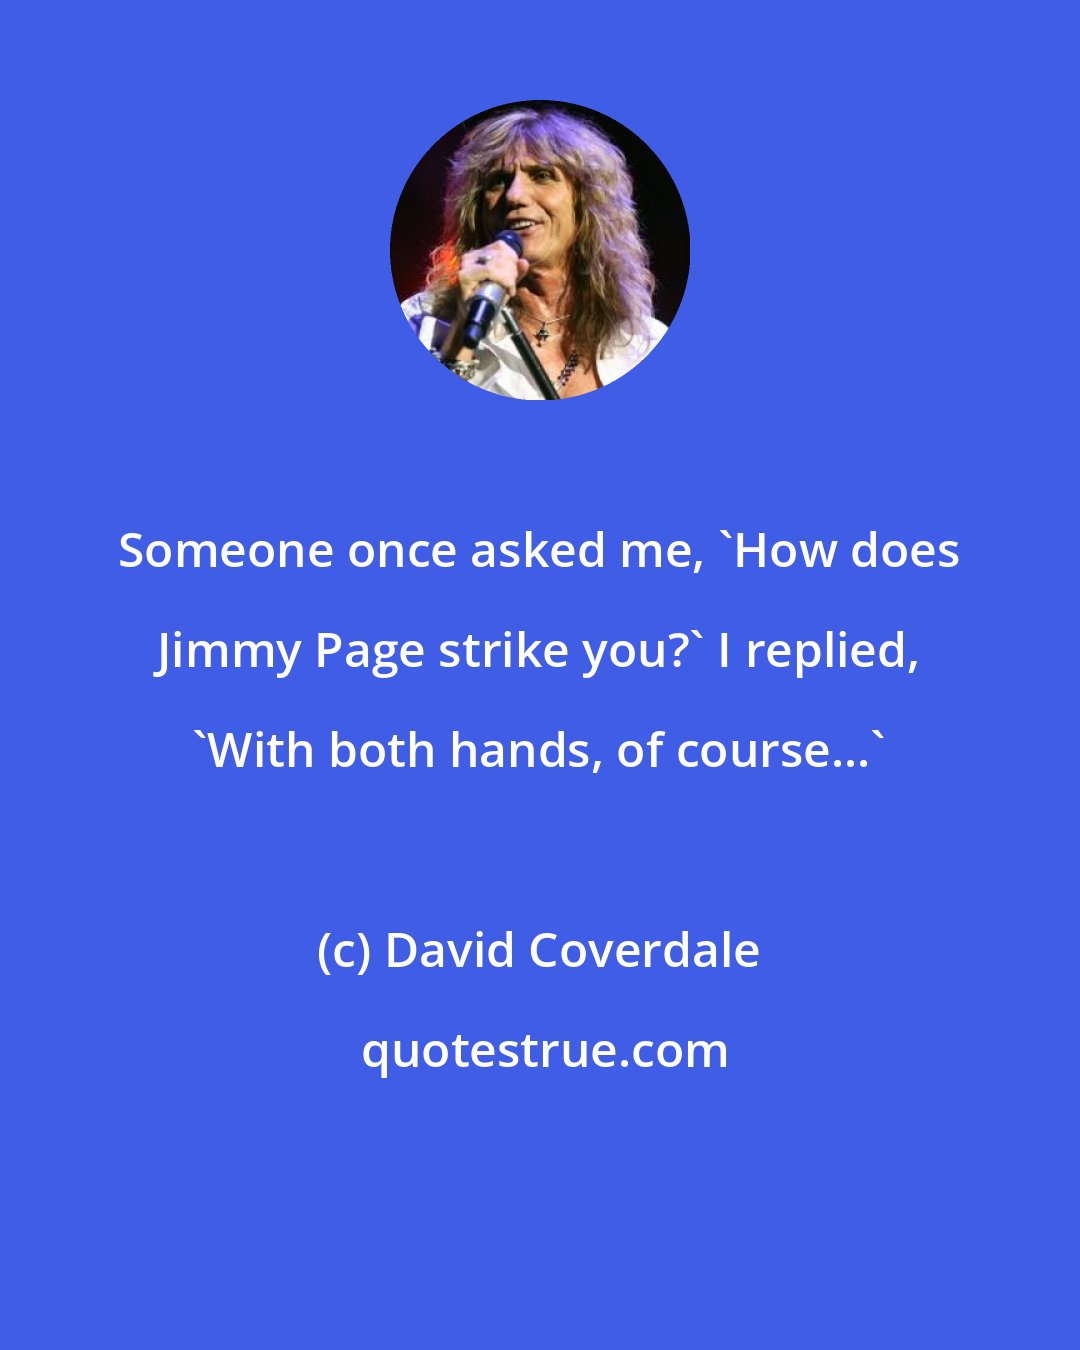 David Coverdale: Someone once asked me, `How does Jimmy Page strike you?' I replied, `With both hands, of course...'